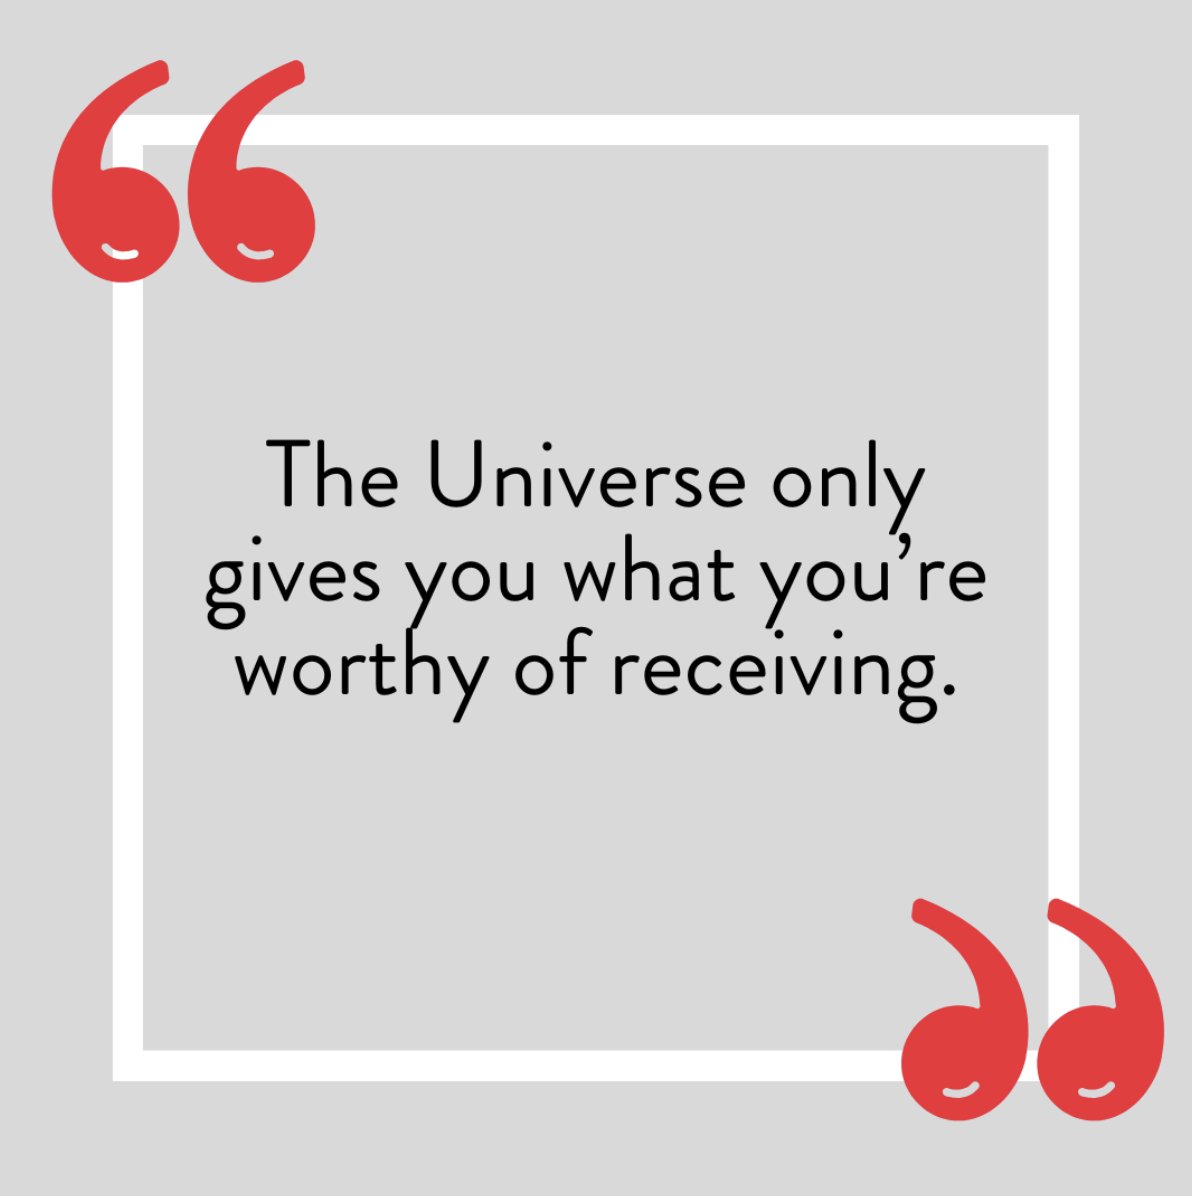 ✨ 'The Universe only gives you what you're worthy of receiving.' ✨

Let's reflect on that today! The universe will recognize the potential within each of us. We need to open our hearts and minds to it!

#opportunity #opportunities